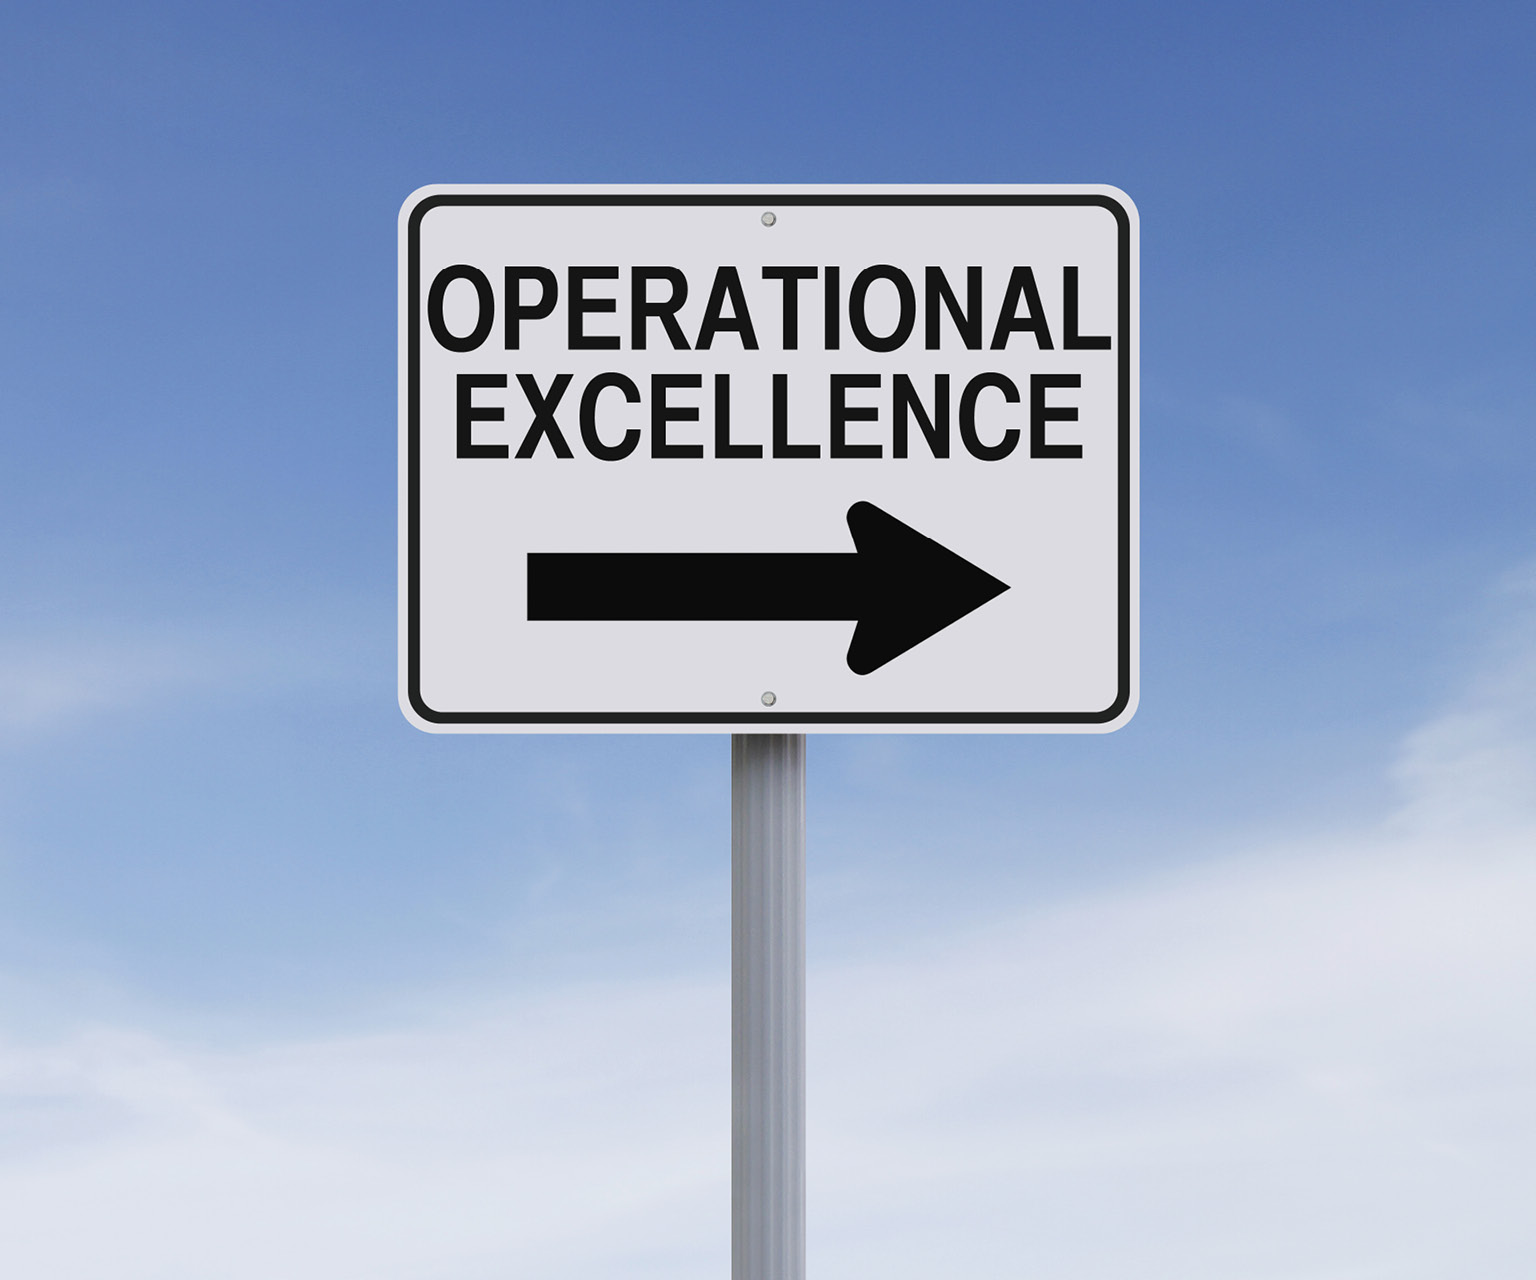 operational excellence sign with arrow pointing to the right